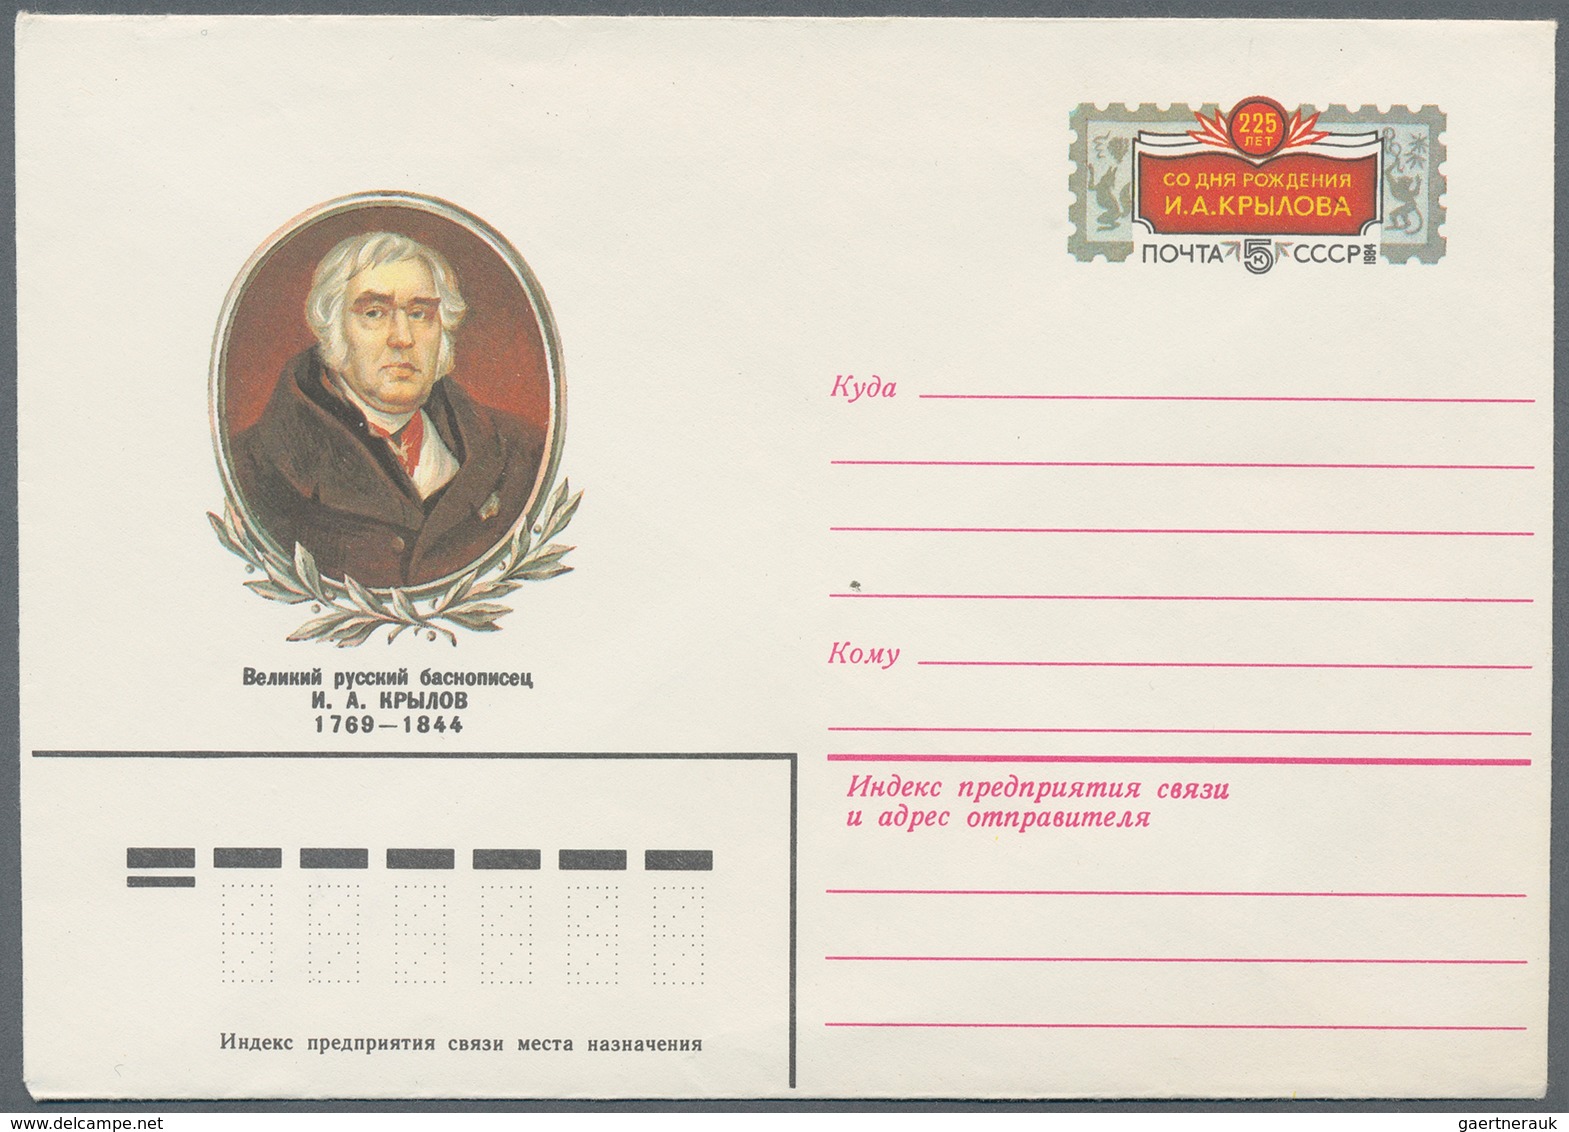 Sowjetunion - Ganzsachen: 1984 Two Unused Pictured Postal Stationery Envelopes On The Occasion Of Th - Unclassified